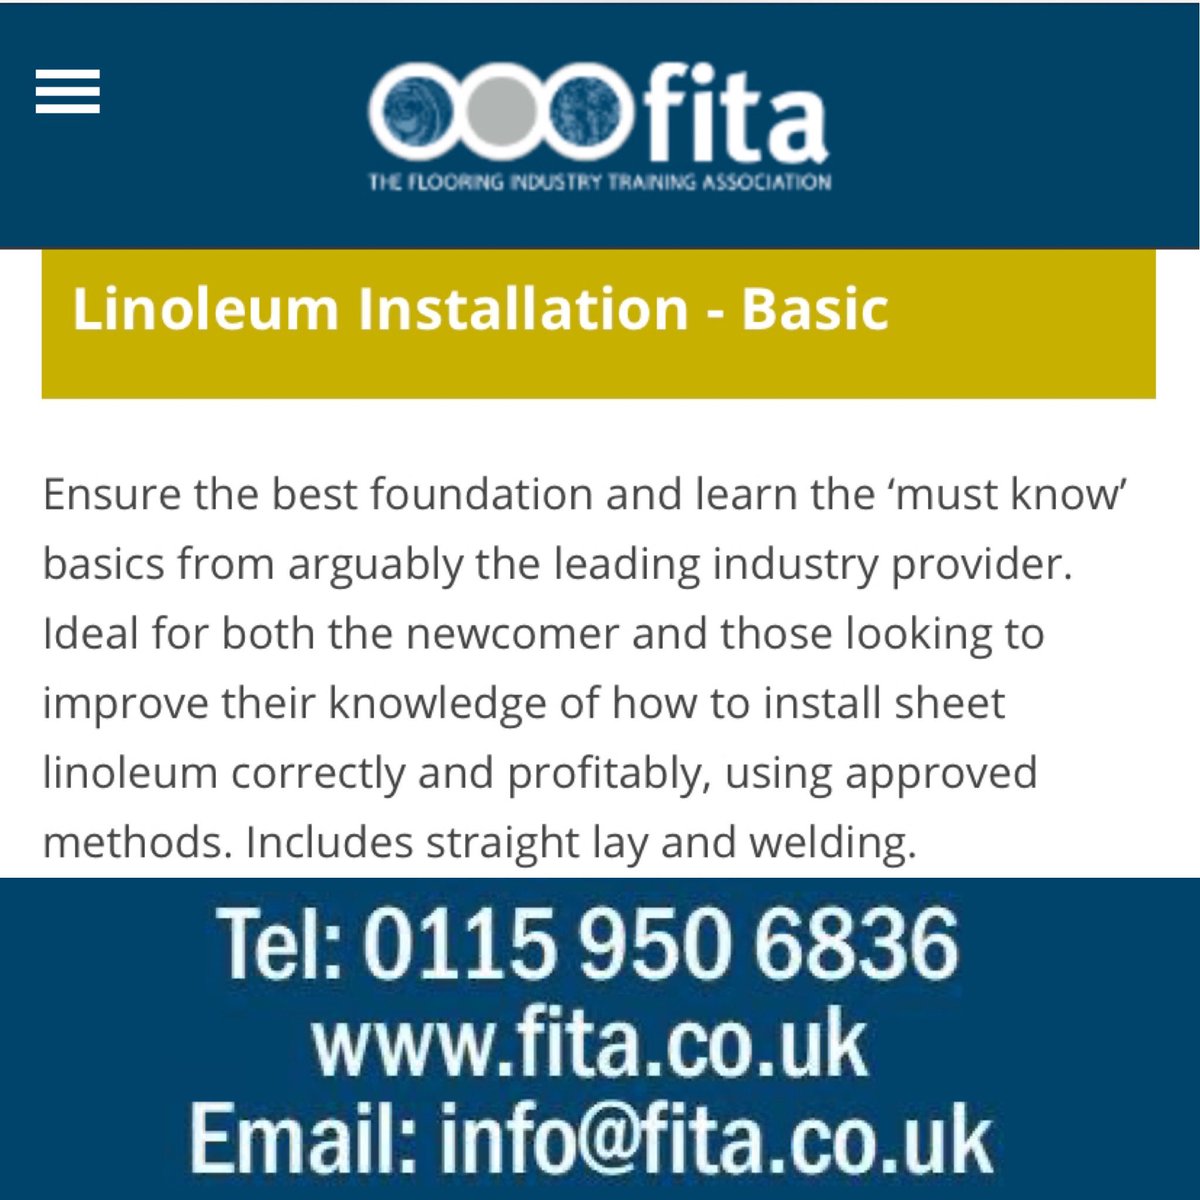 We have one remaining space on our upcoming 2 day Linoleum basic course 14-15 Nov. For more information or to book then be quick and contact us direct or through the website. #TheFITAWay #training #lino #flooring. @ForboFlooringUK